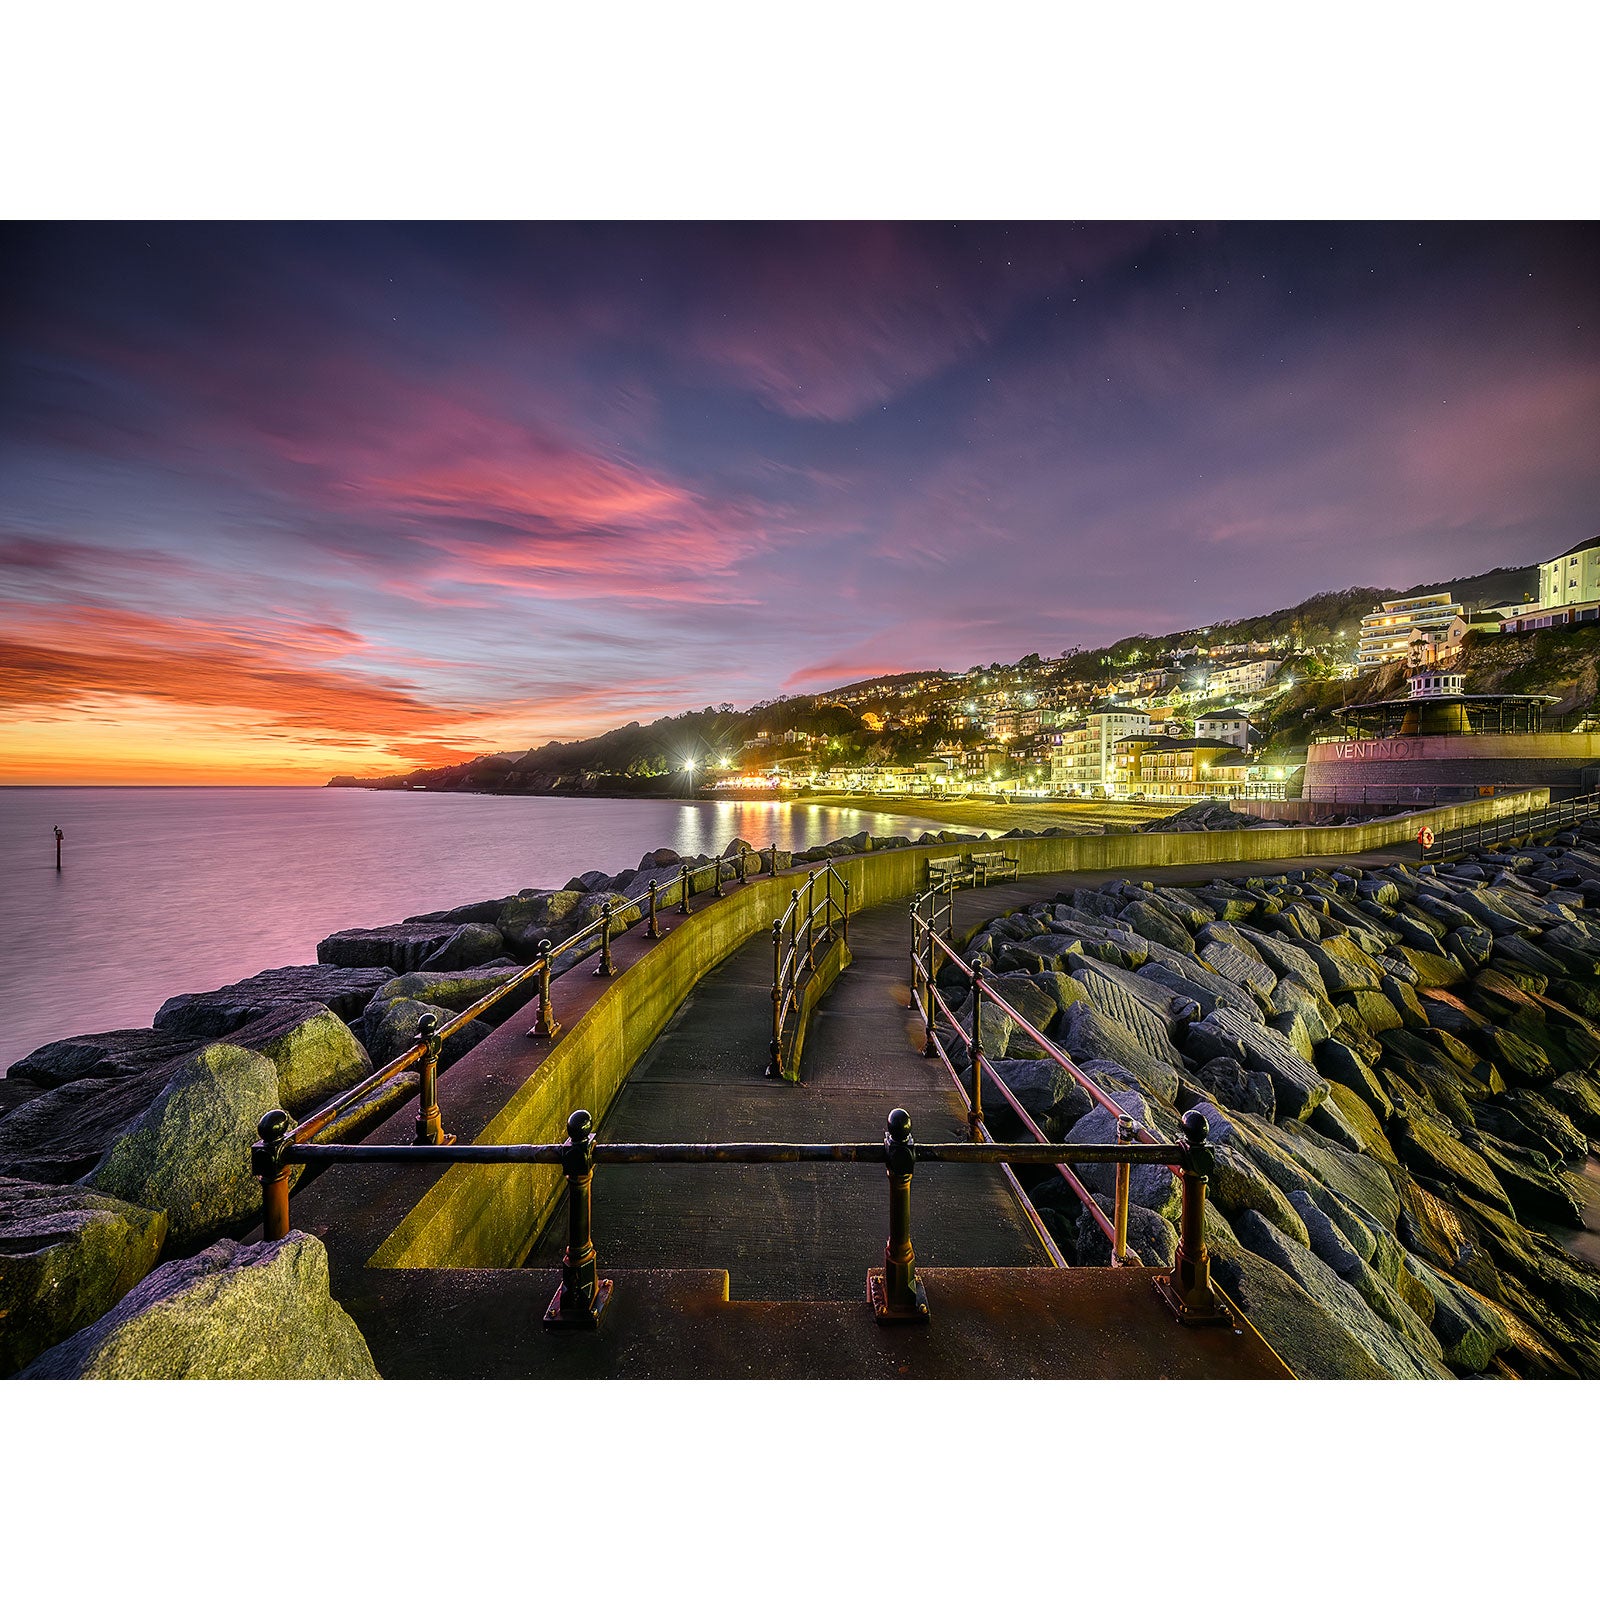 A vibrant sunset over the coastal town of Gascoigne Isle with illuminated buildings and a jetty stretching into the sea captured in Ventnor by Available Light Photography.